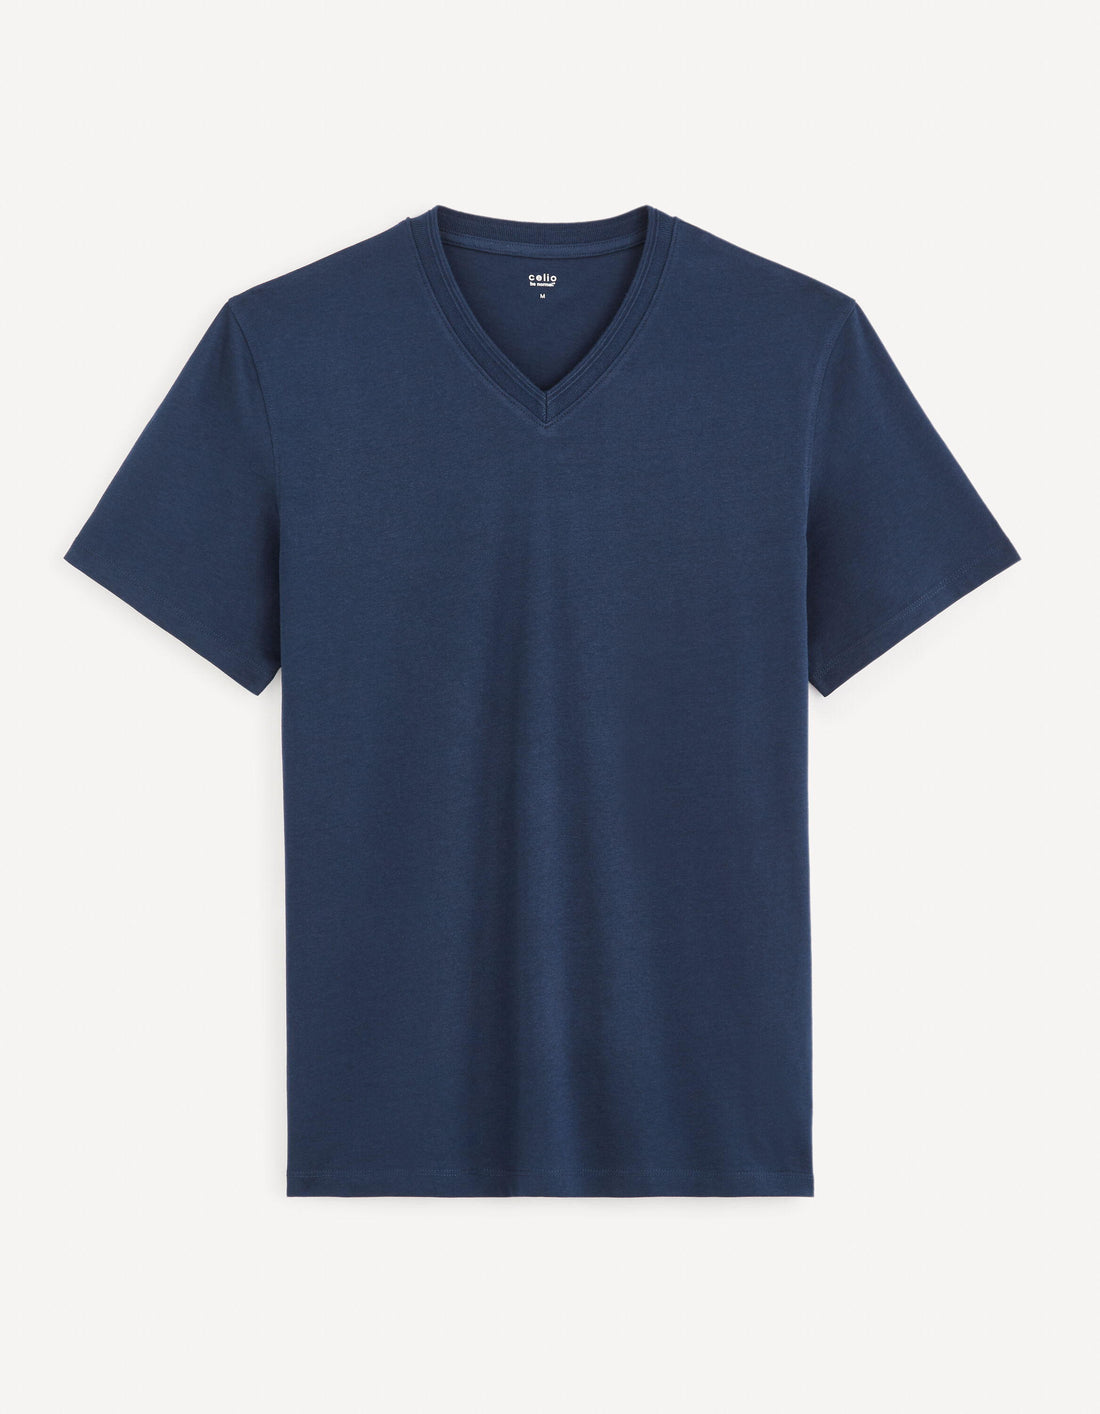 Cotton V-Neck T-Shirt_GENFILE_NAVY_01